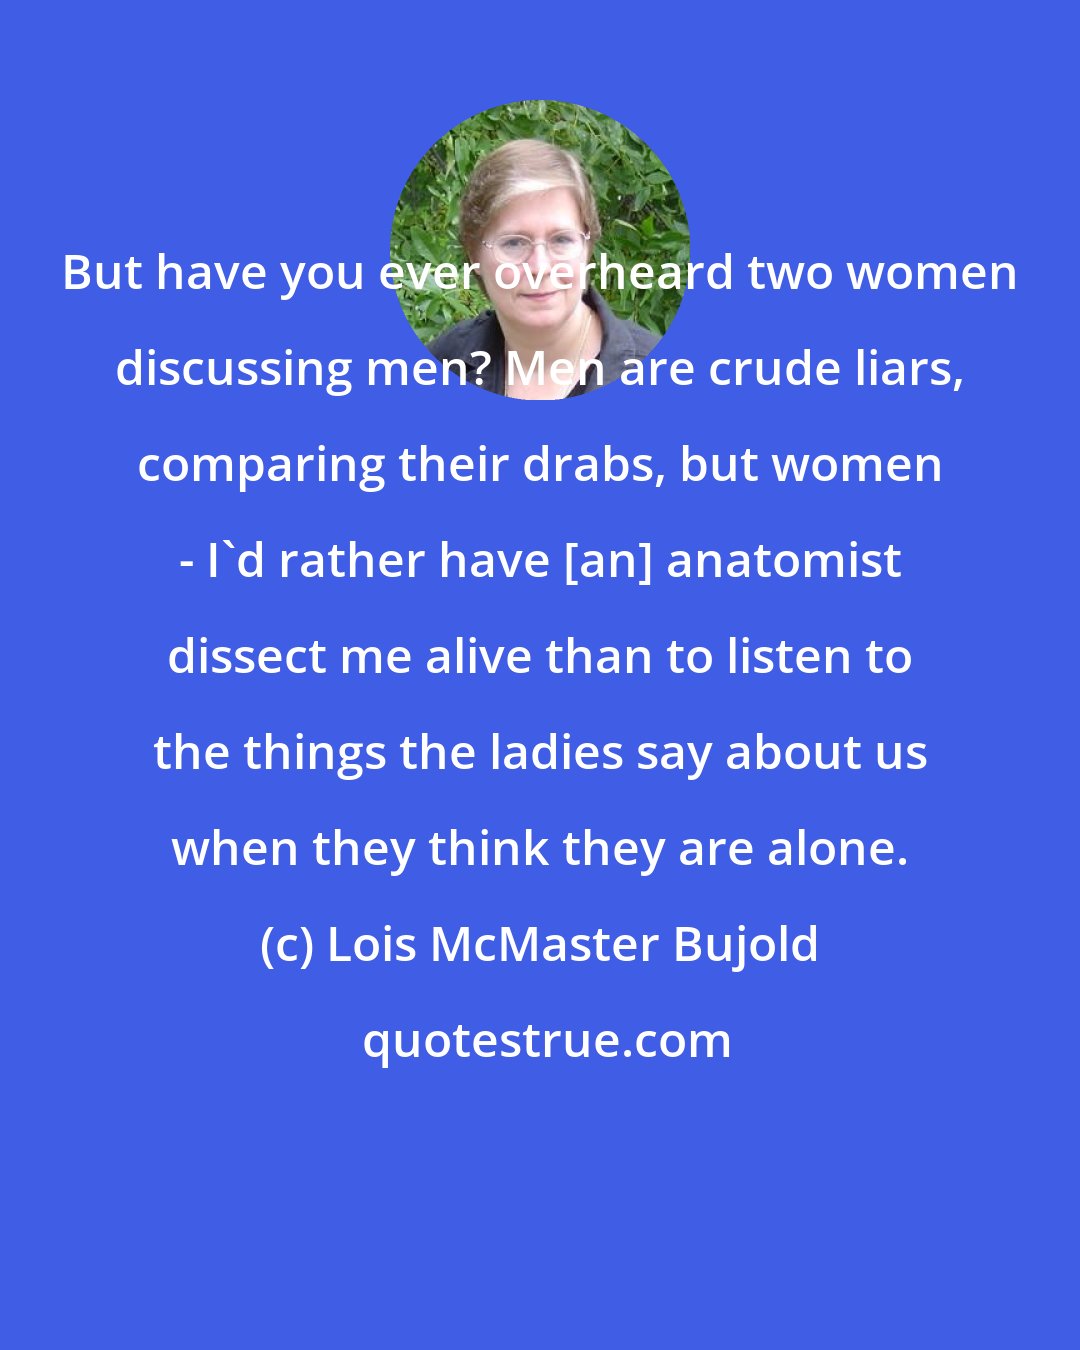 Lois McMaster Bujold: But have you ever overheard two women discussing men? Men are crude liars, comparing their drabs, but women - I'd rather have [an] anatomist dissect me alive than to listen to the things the ladies say about us when they think they are alone.